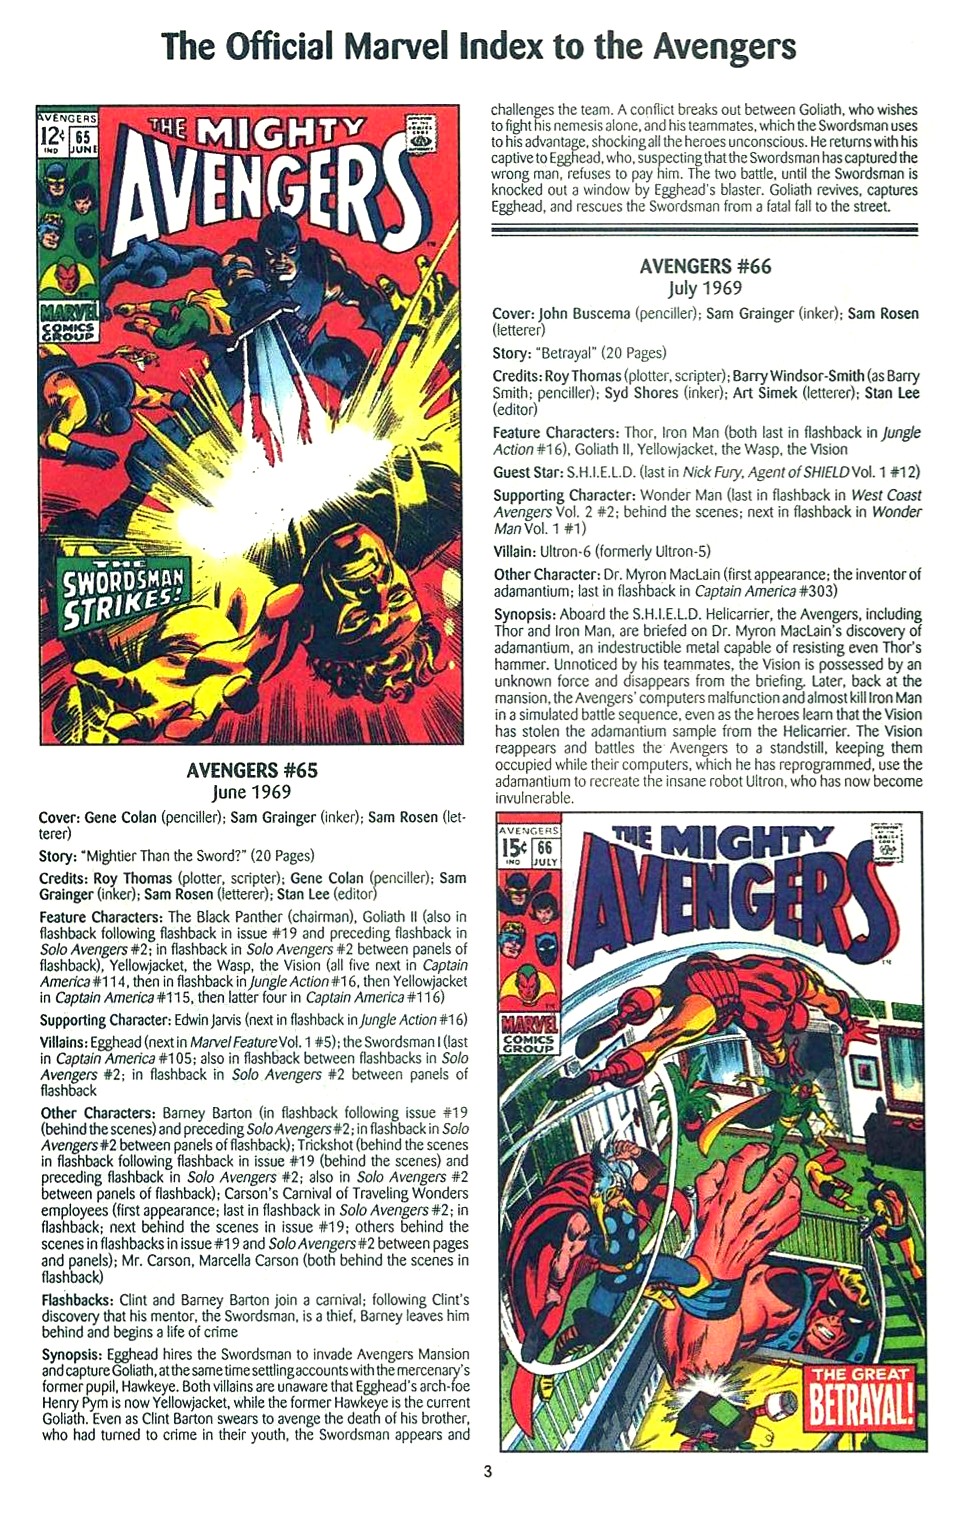 Read online The Official Marvel Index to the Avengers comic -  Issue #2 - 5